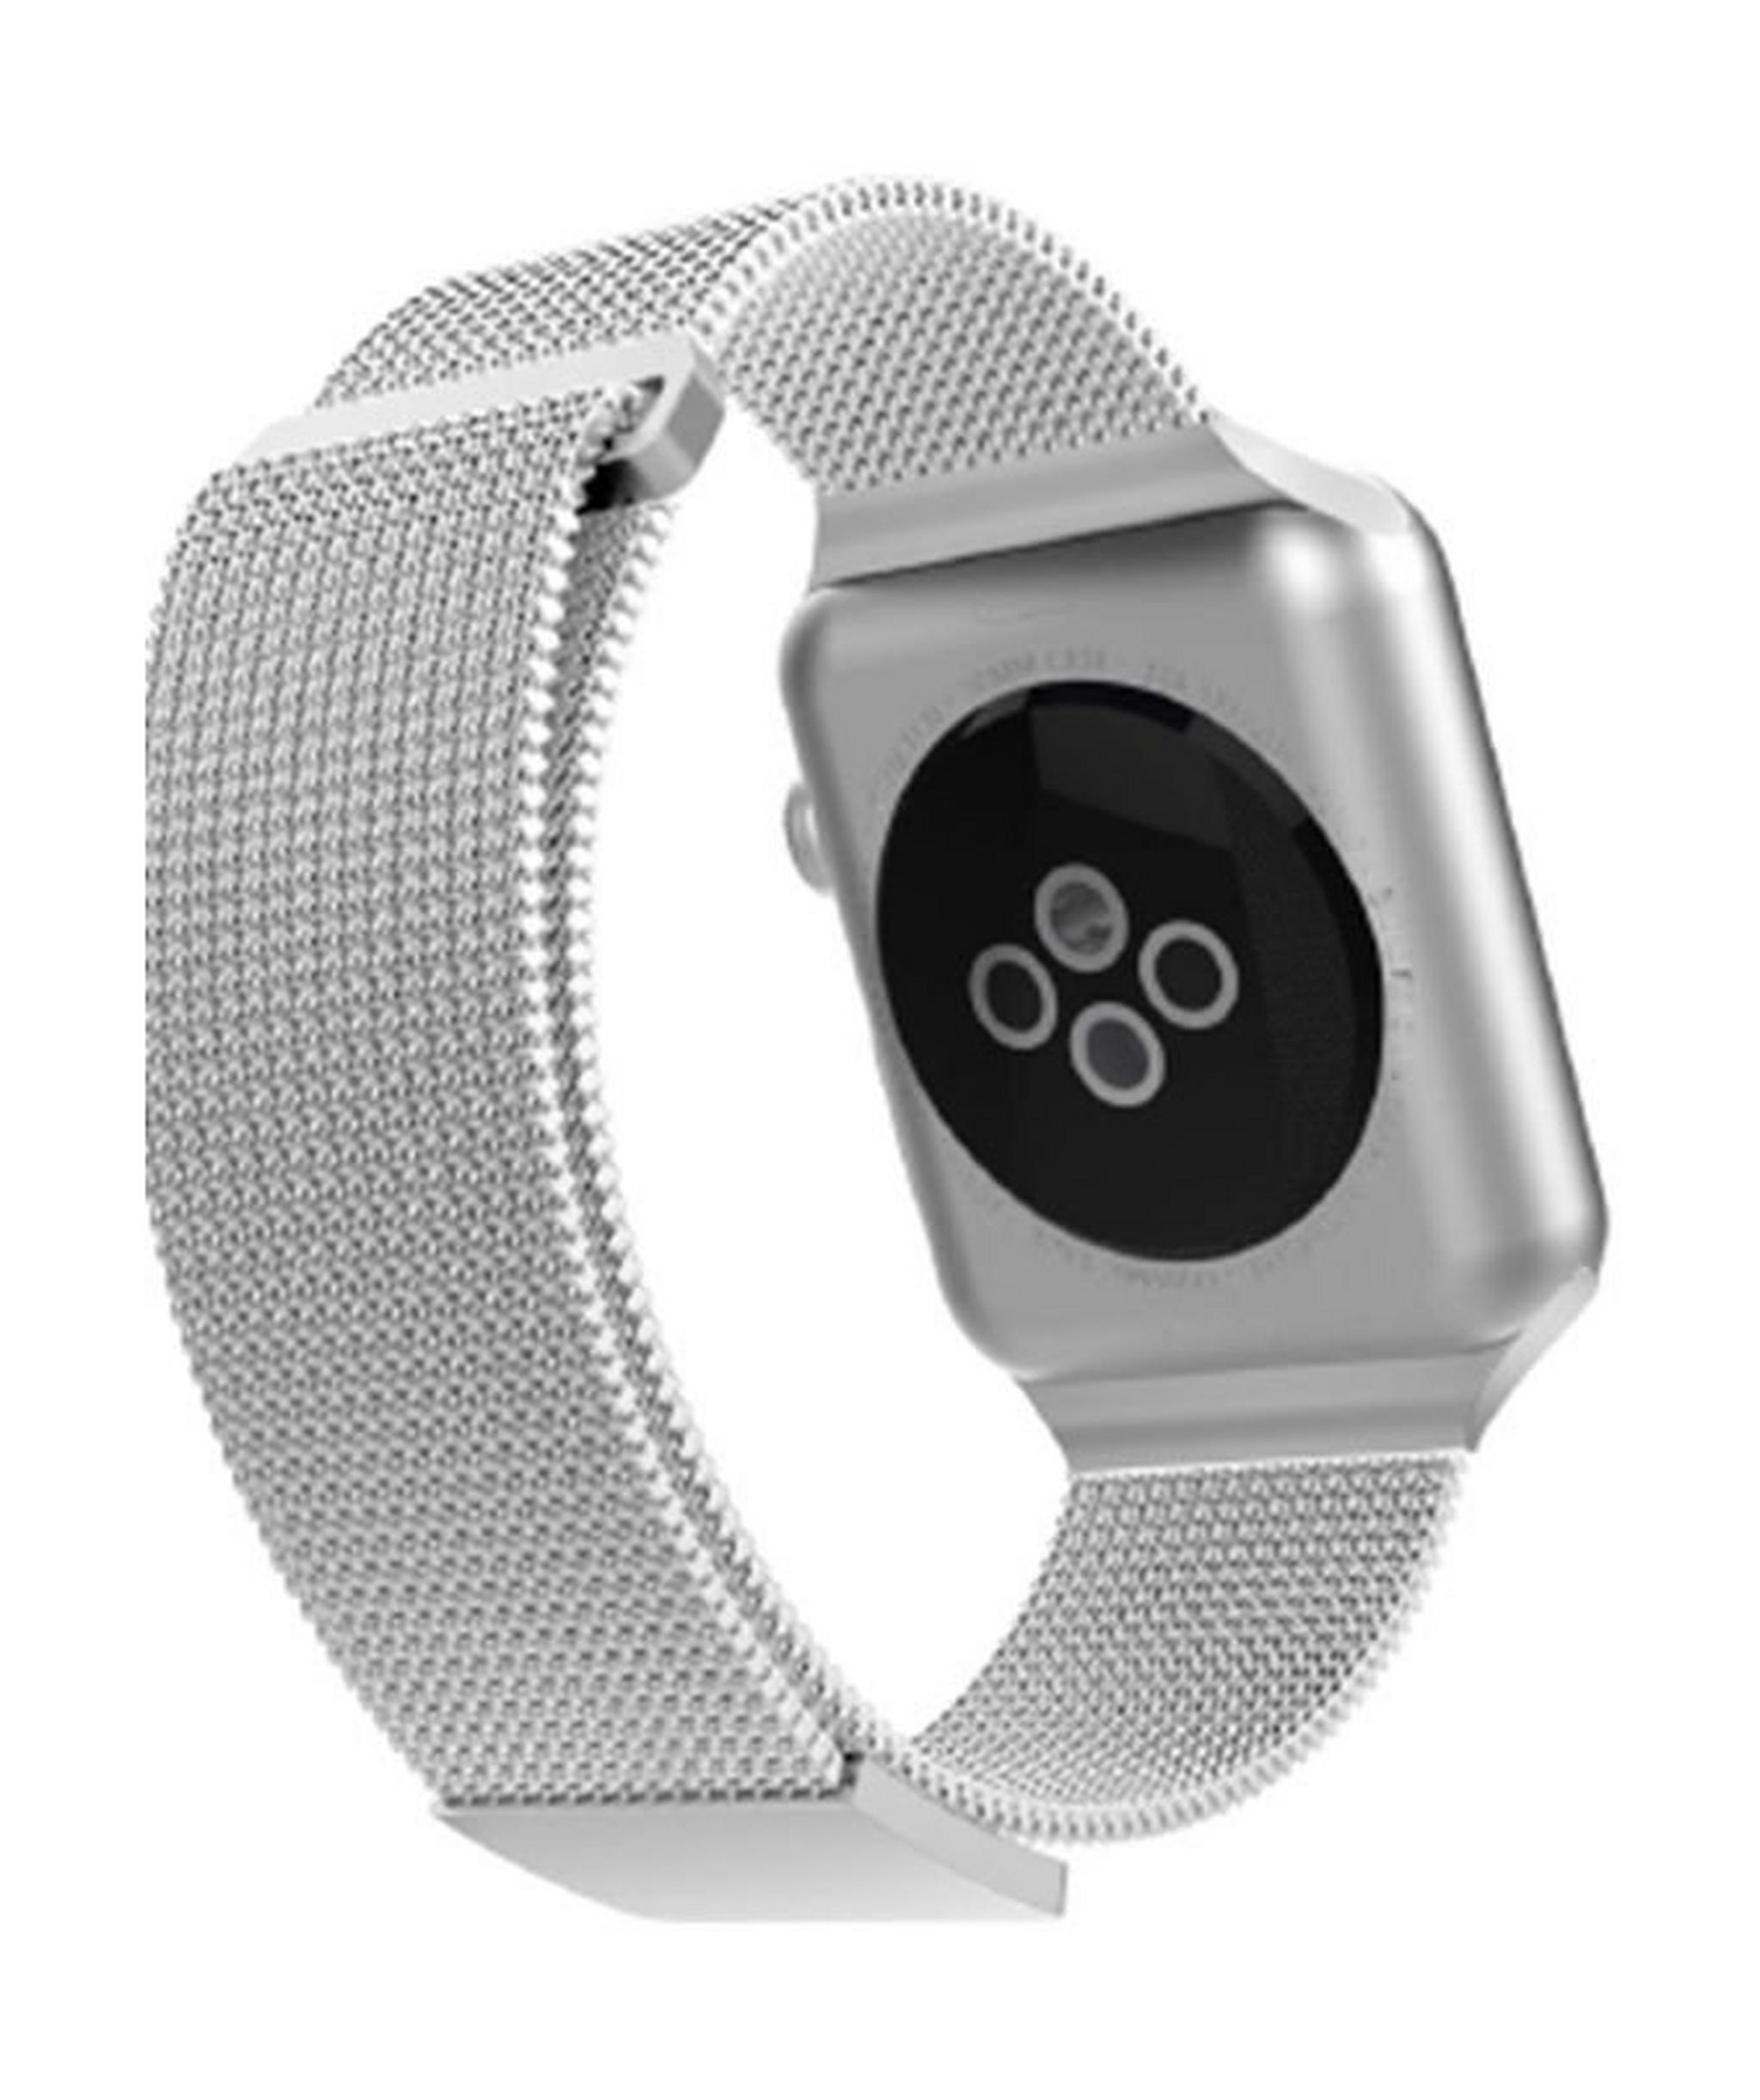 X-Doria Milanese Band Wrist Strap for Apple Watch 42 mm - Silver